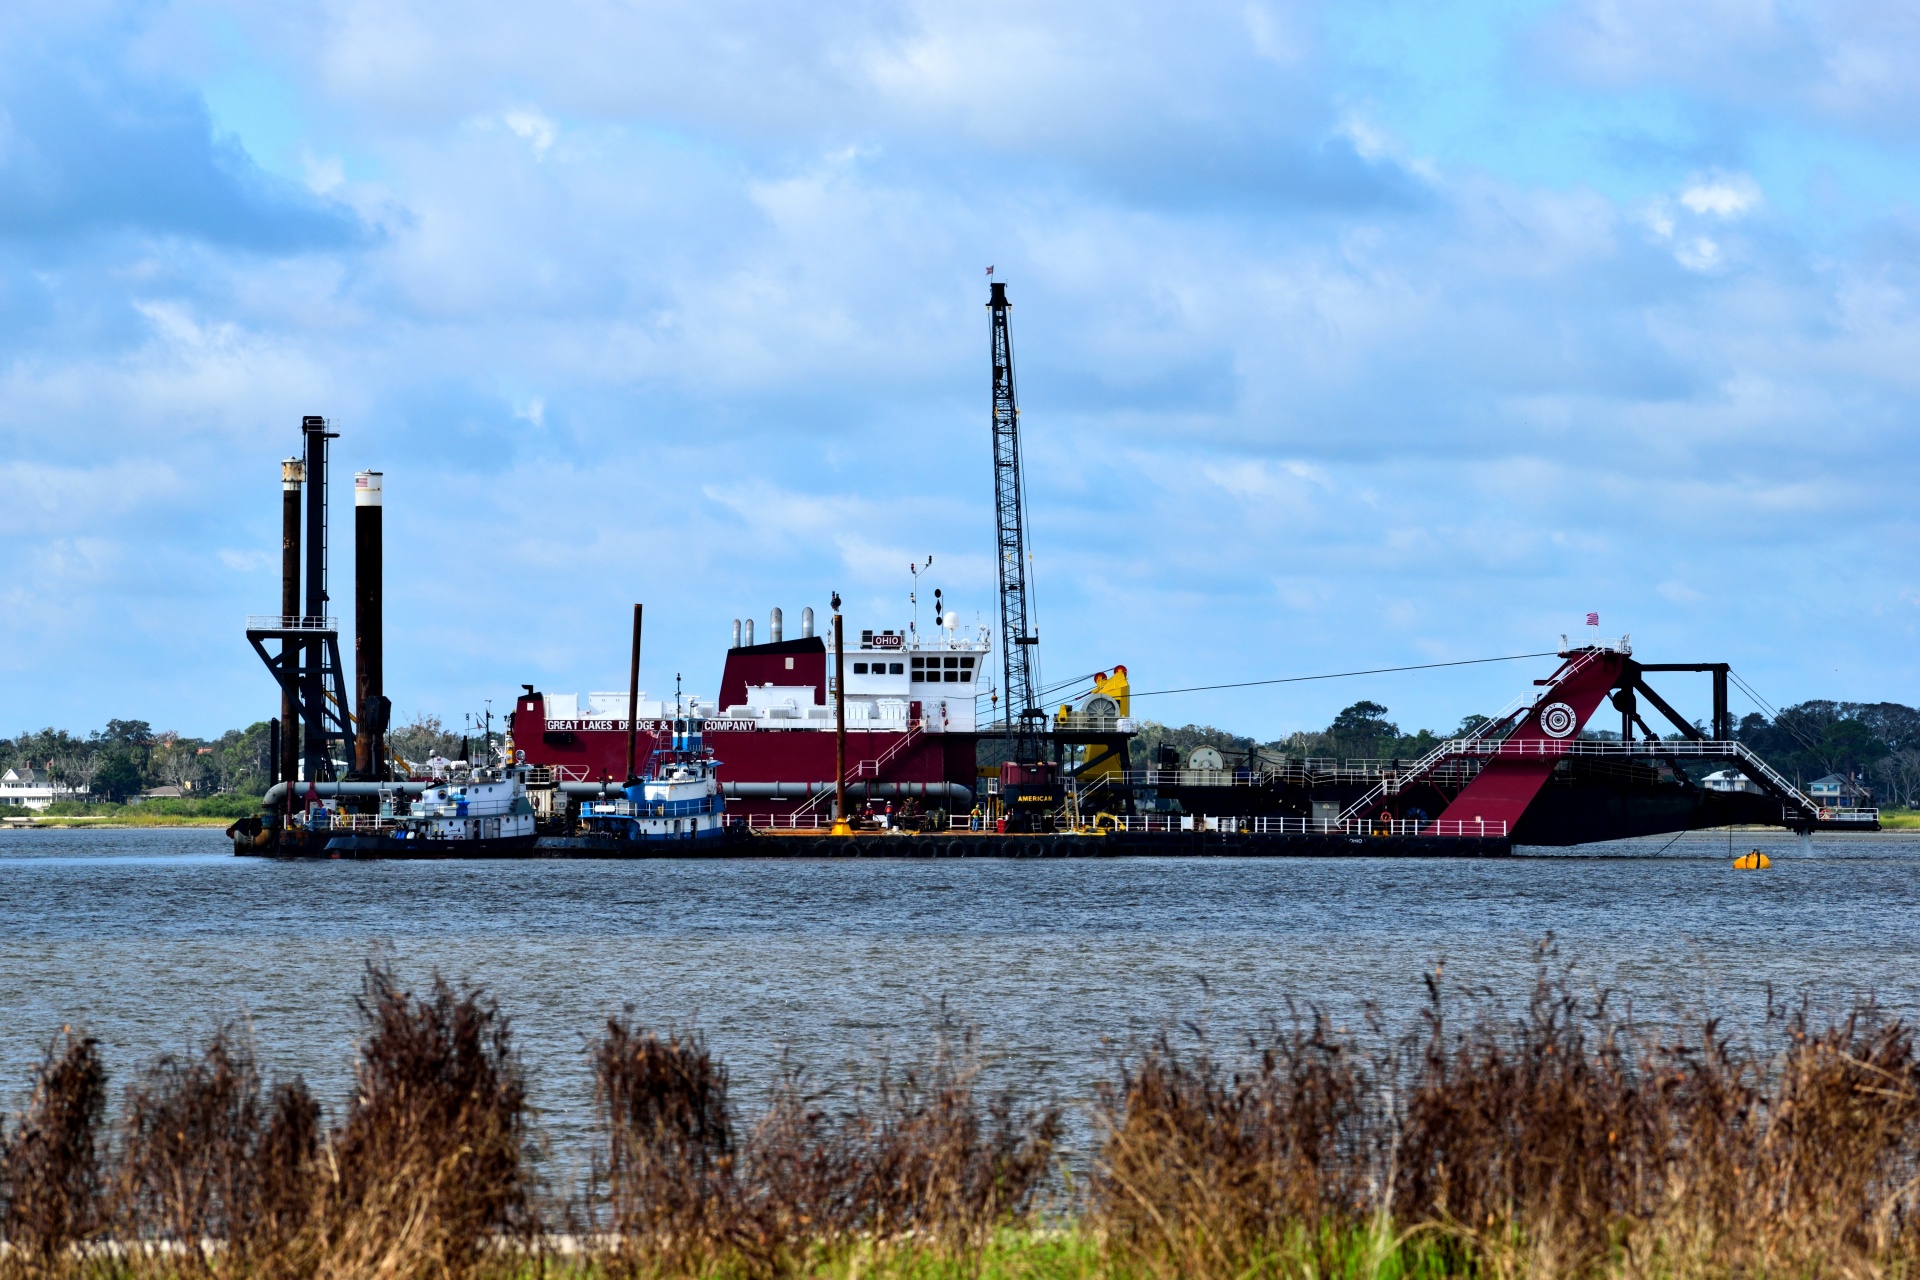 Tug and barge on the river St. Augustine, Florida